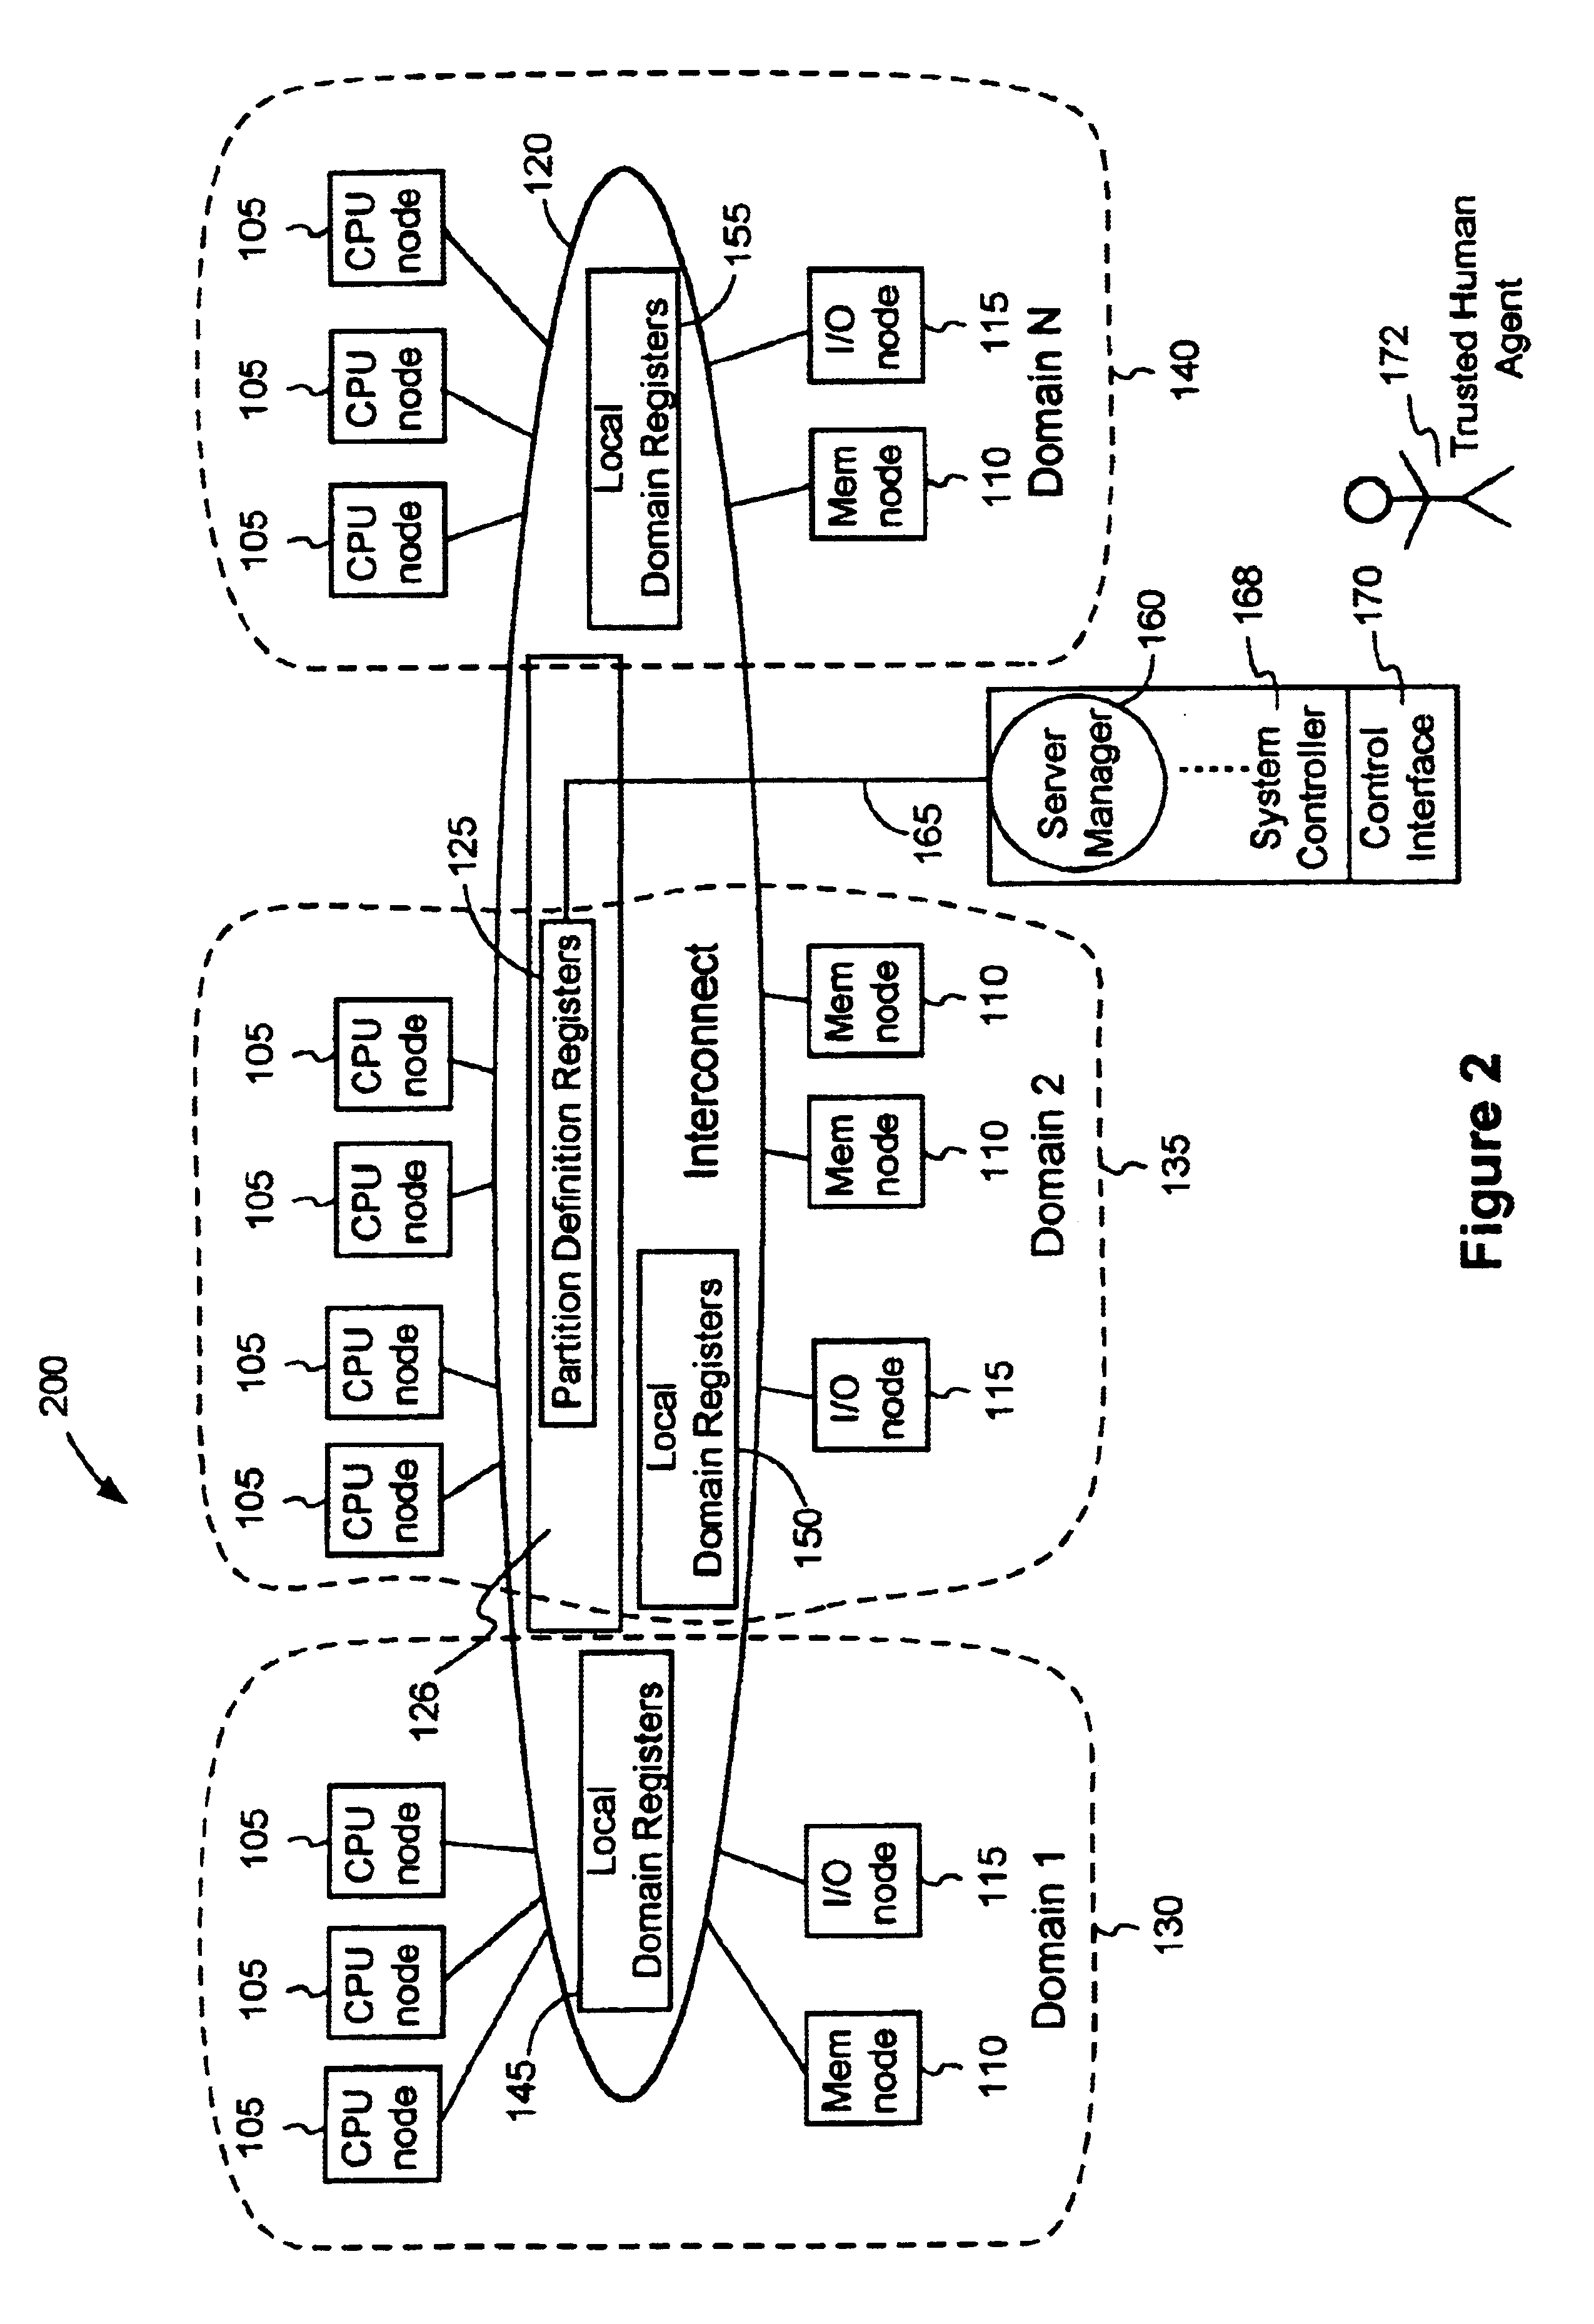 System and method for partitioning a computer system into domains